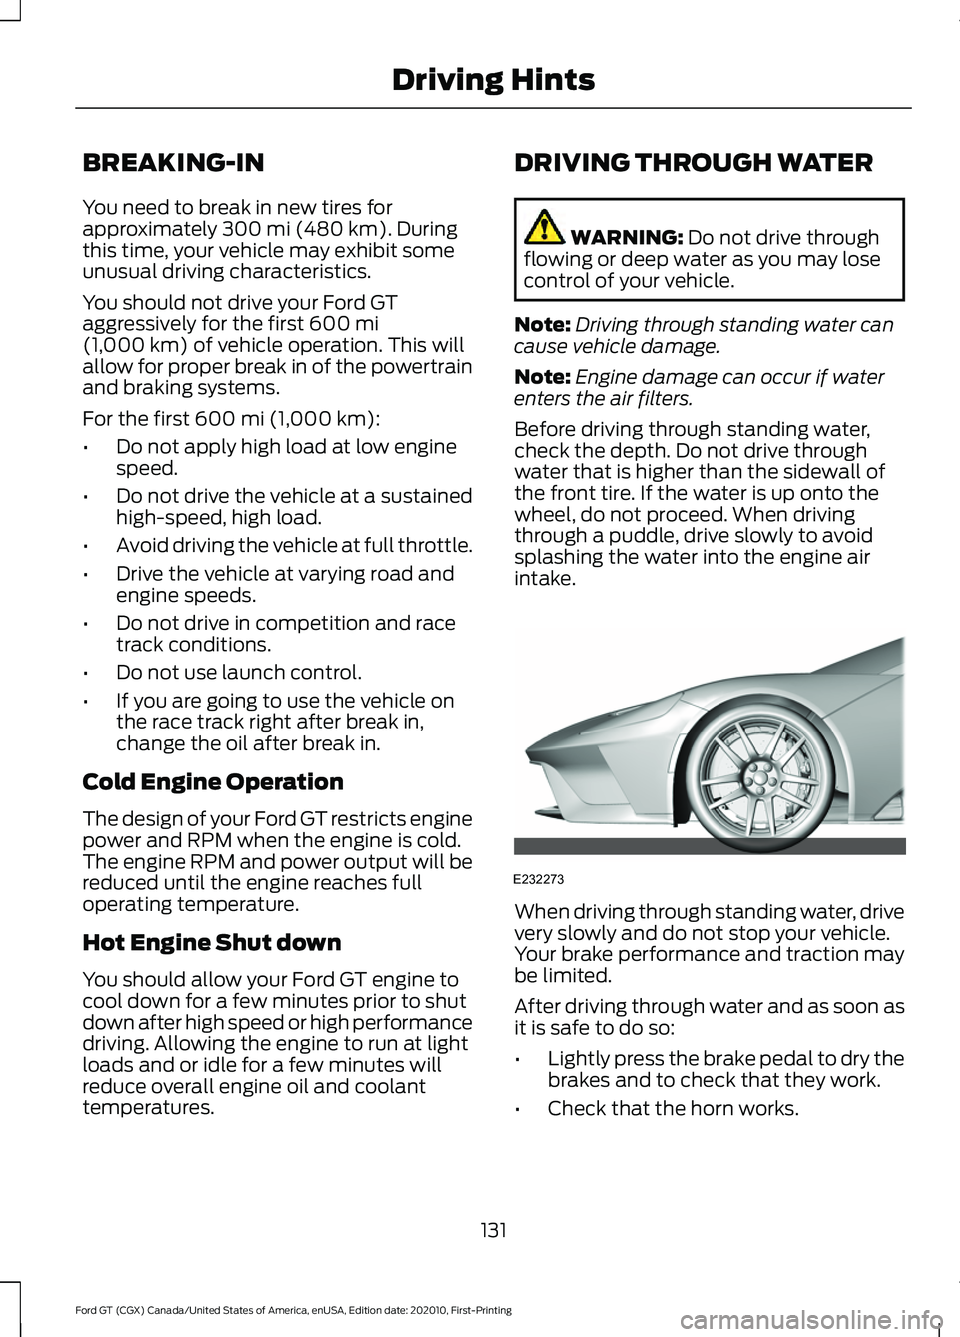 FORD GT 2021  Owners Manual BREAKING-IN
You need to break in new tires for
approximately 300 mi (480 km). During
this time, your vehicle may exhibit some
unusual driving characteristics.
You should not drive your Ford GT
aggress